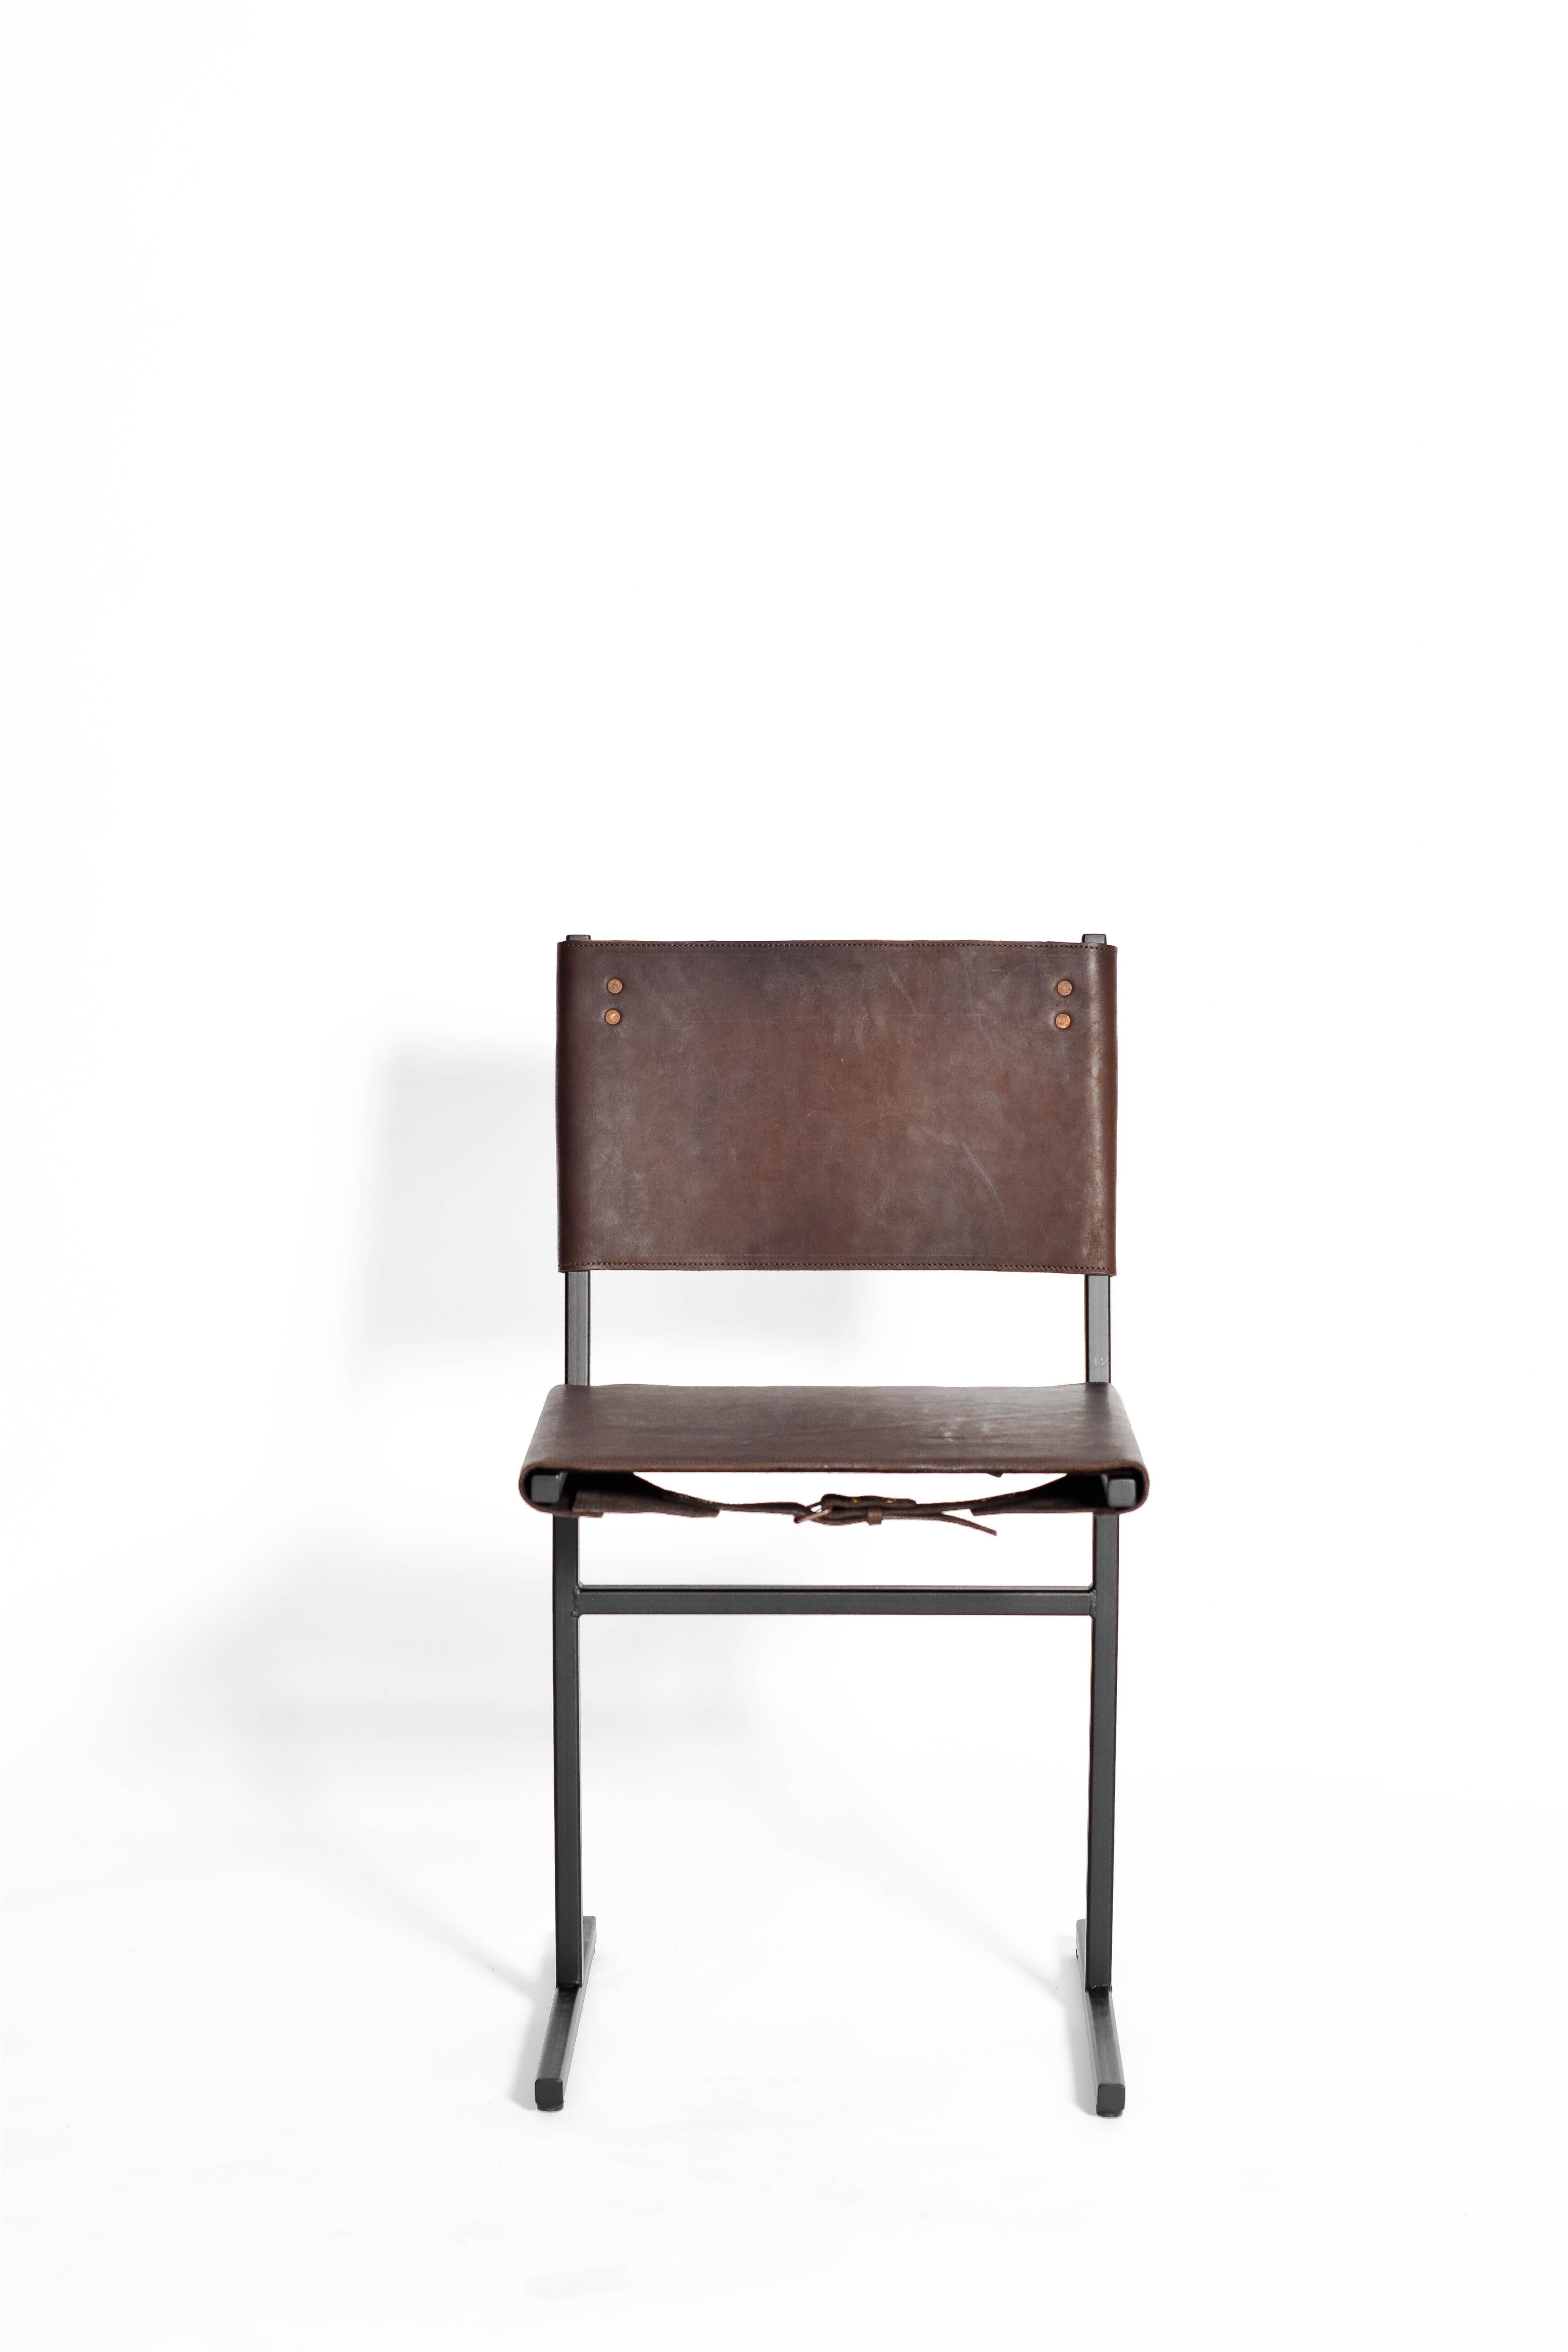 Chocolate and black Memento chair, Jesse Sanderson
Original signed chair by Jesse Sanderson
Materials: Leather, steel
Dimensions: W 43 x D 50 x H 80 cm 
 Seating height: 47 cm.

  

Five lines and a circle – the human body can be as simple